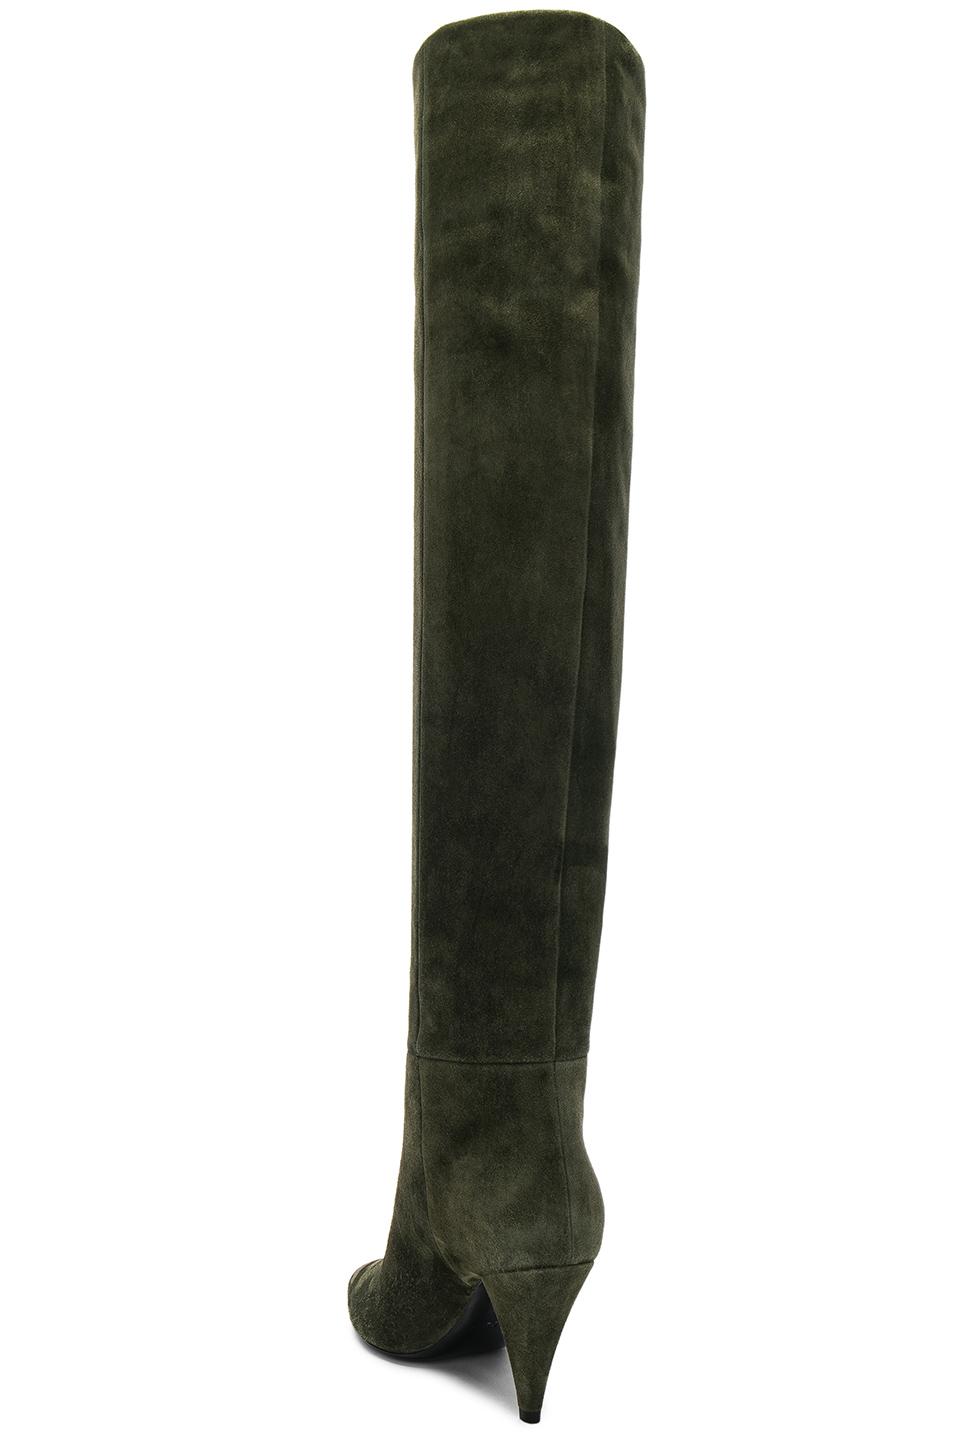 Saint Laurent Era Suede Heeled Thigh High Boots In Army Green | Lyst